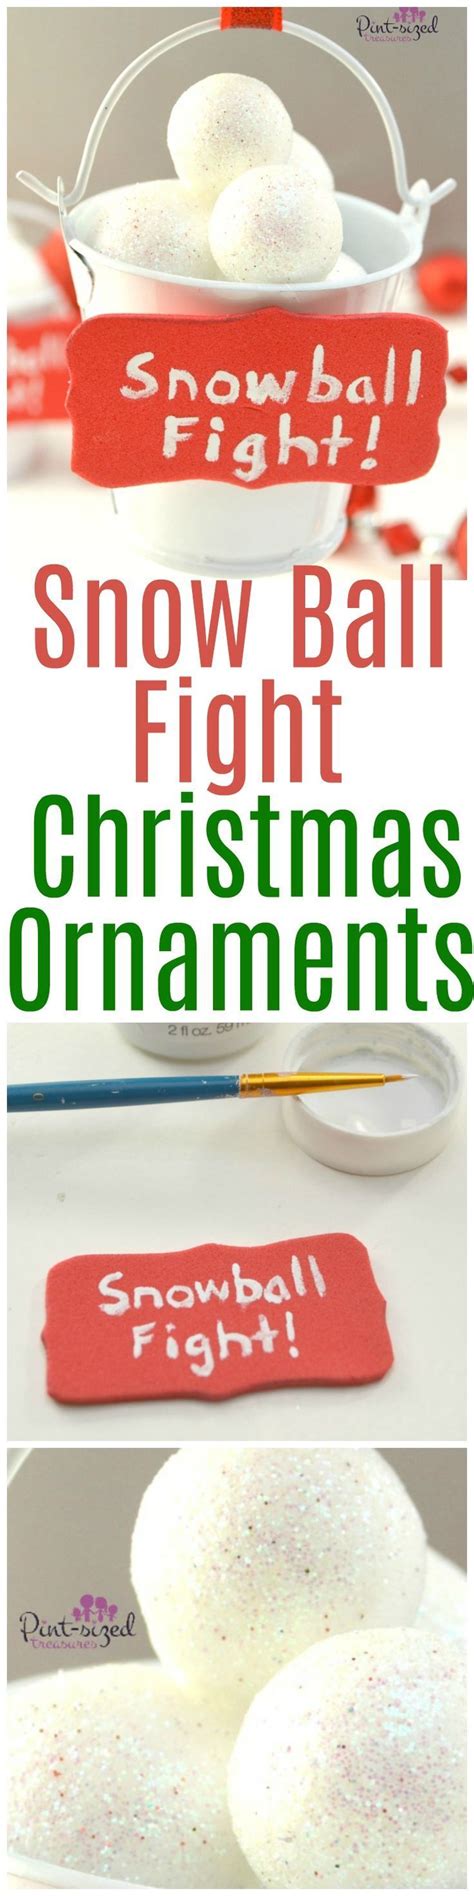 Diy Snowball Fight Christmas Ornaments Are Super Easy To Make These